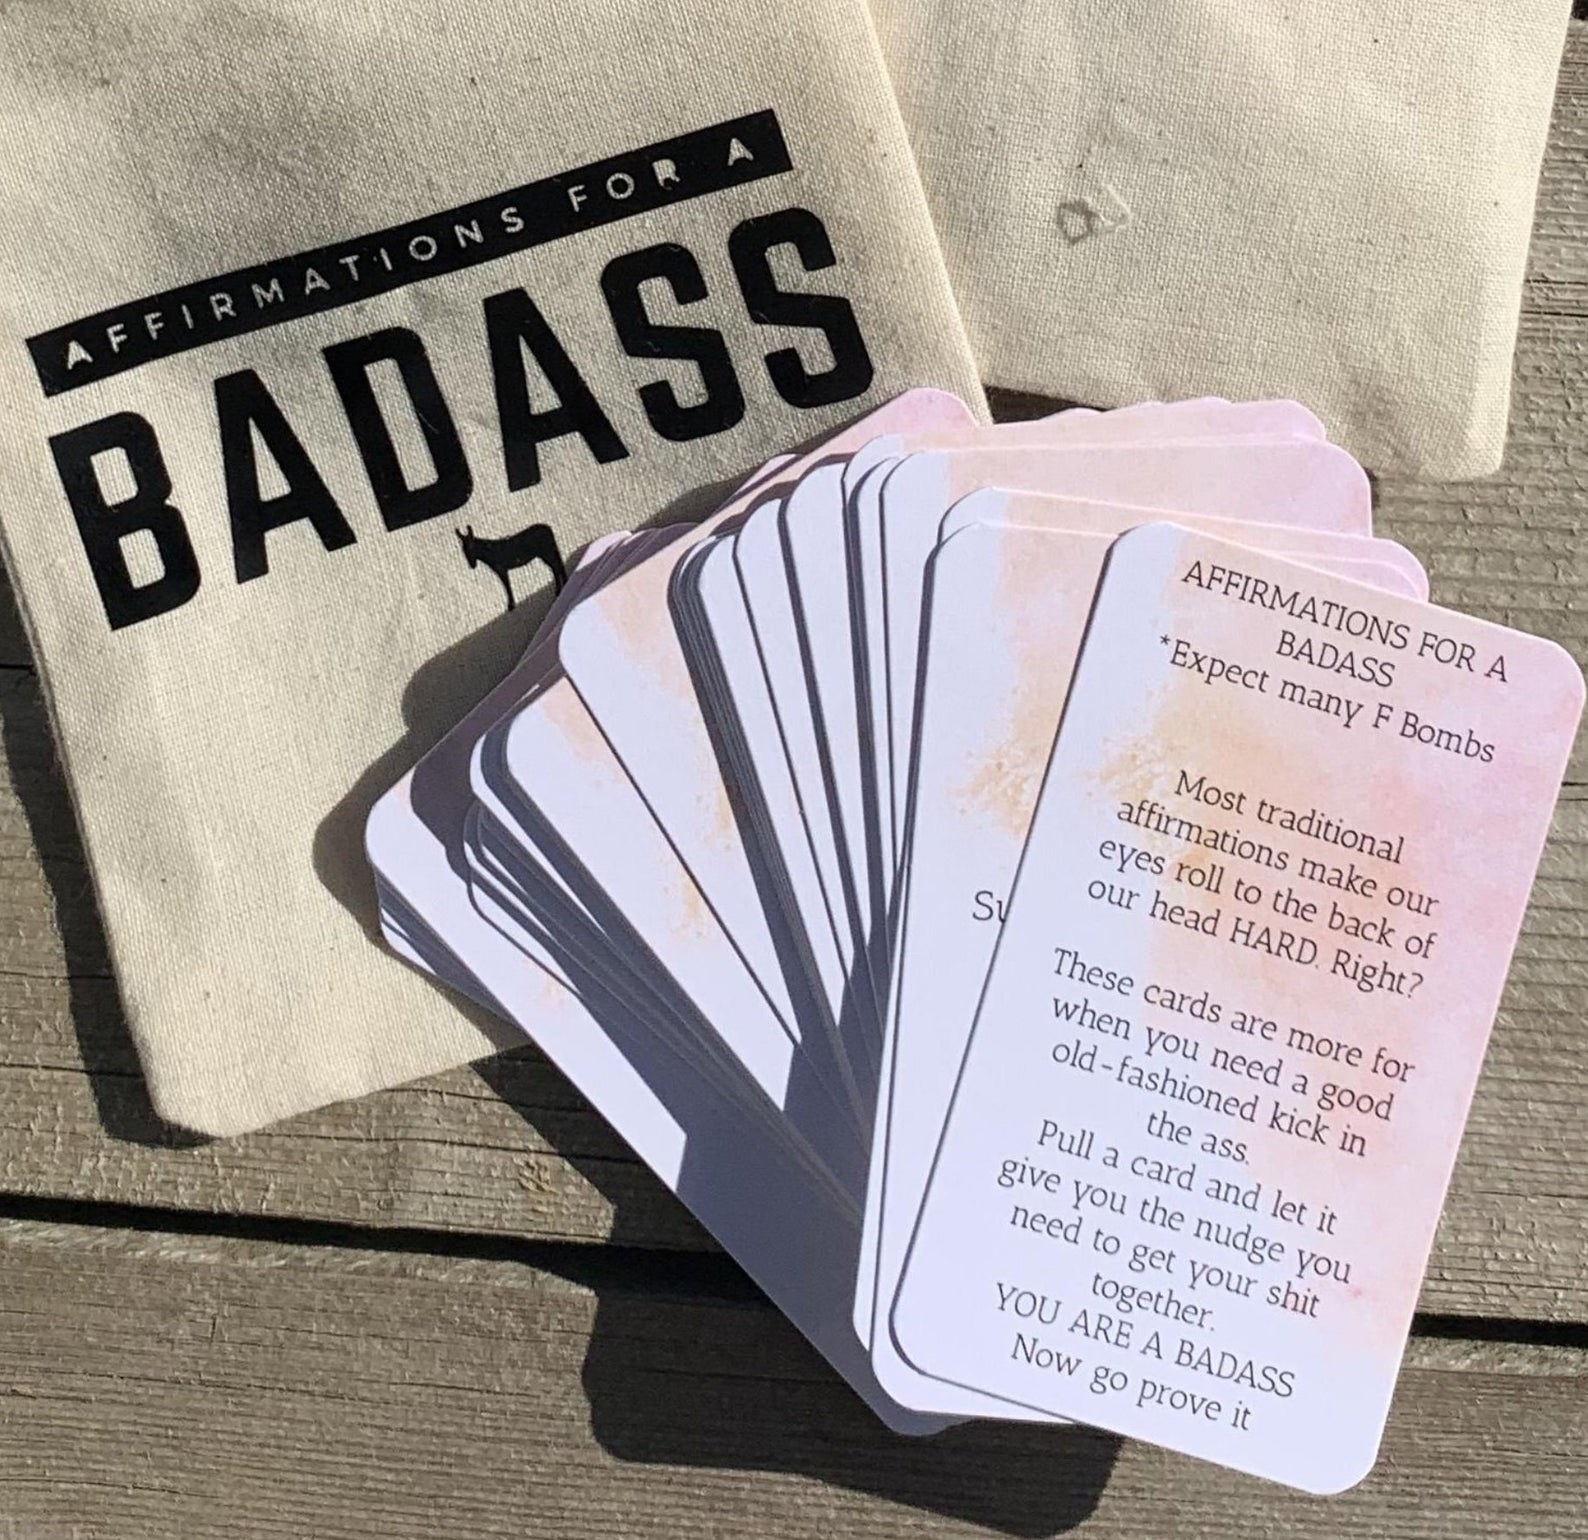 a pack of the cards on a bag that says affirmations for a badass